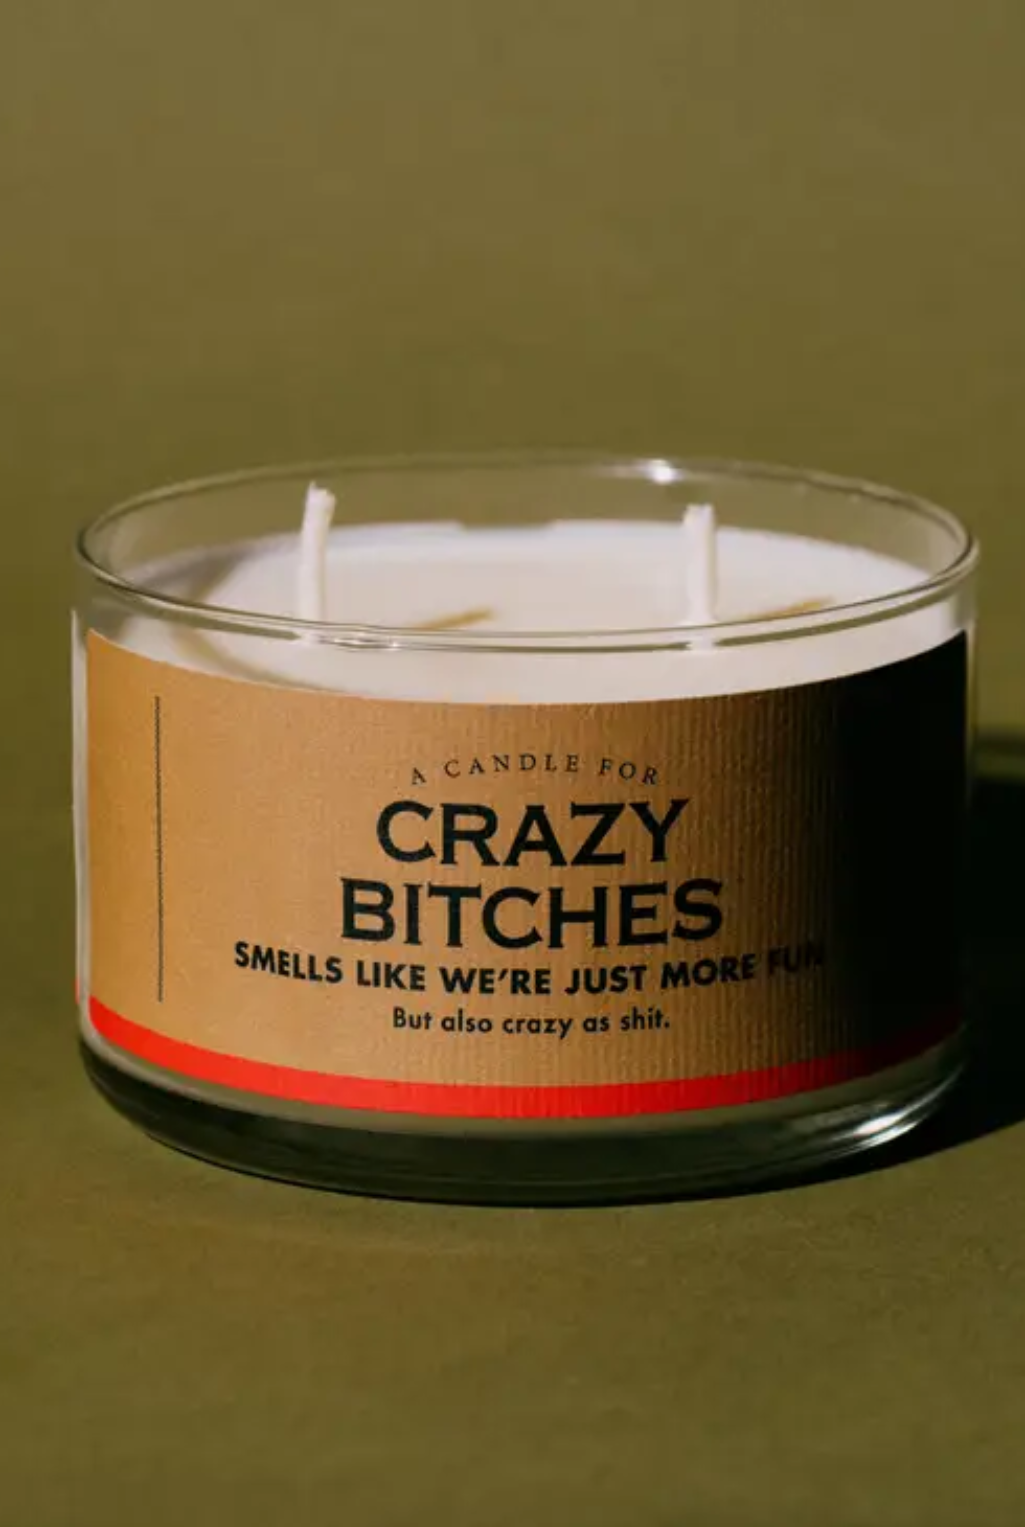 Crazy Bitches Candle